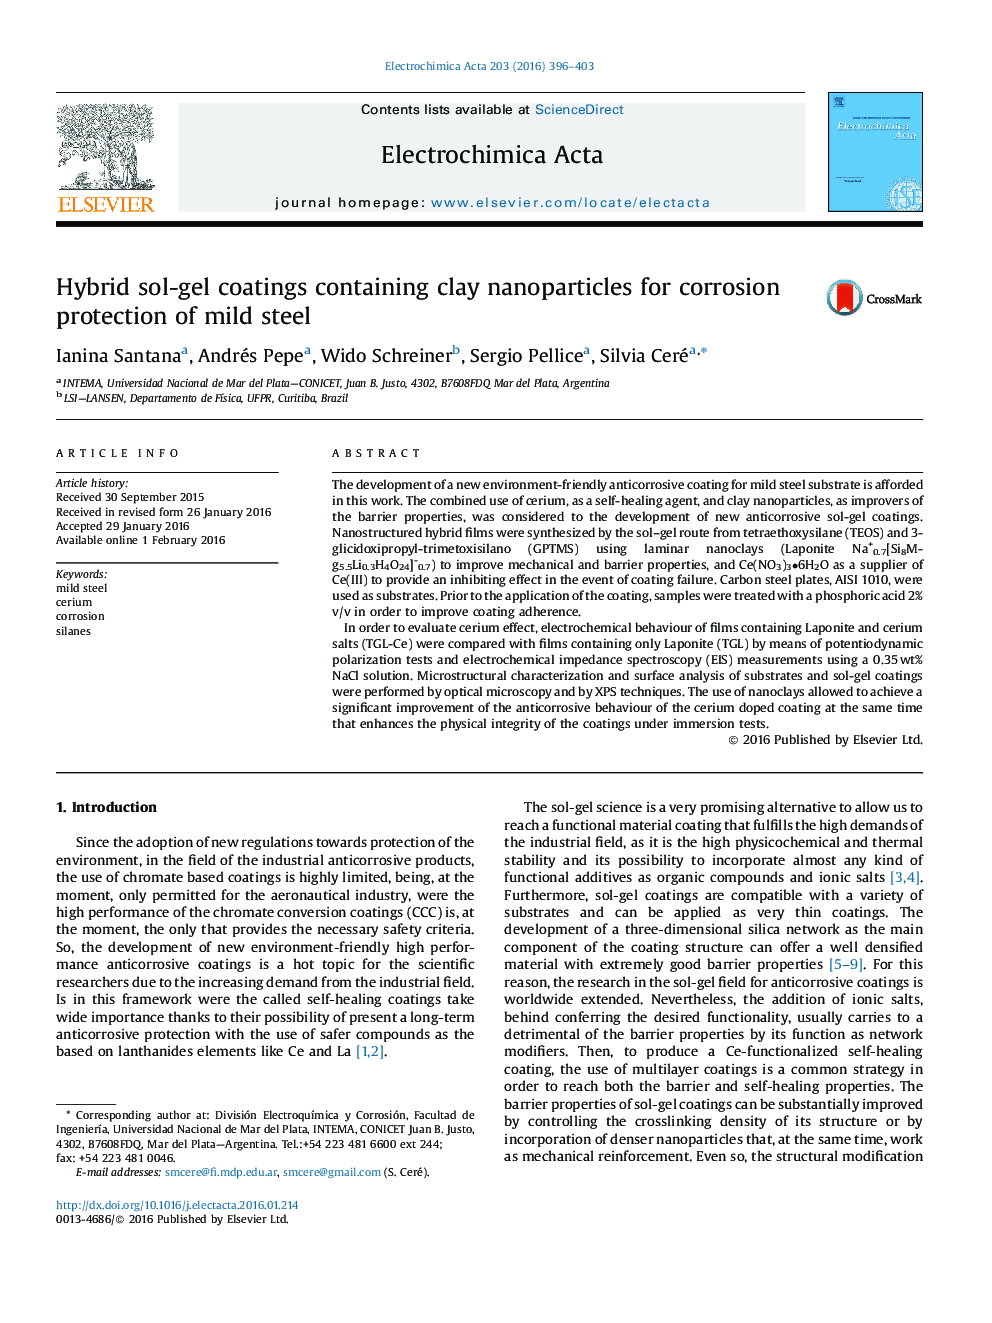 Hybrid sol-gel coatings containing clay nanoparticles for corrosion protection of mild steel